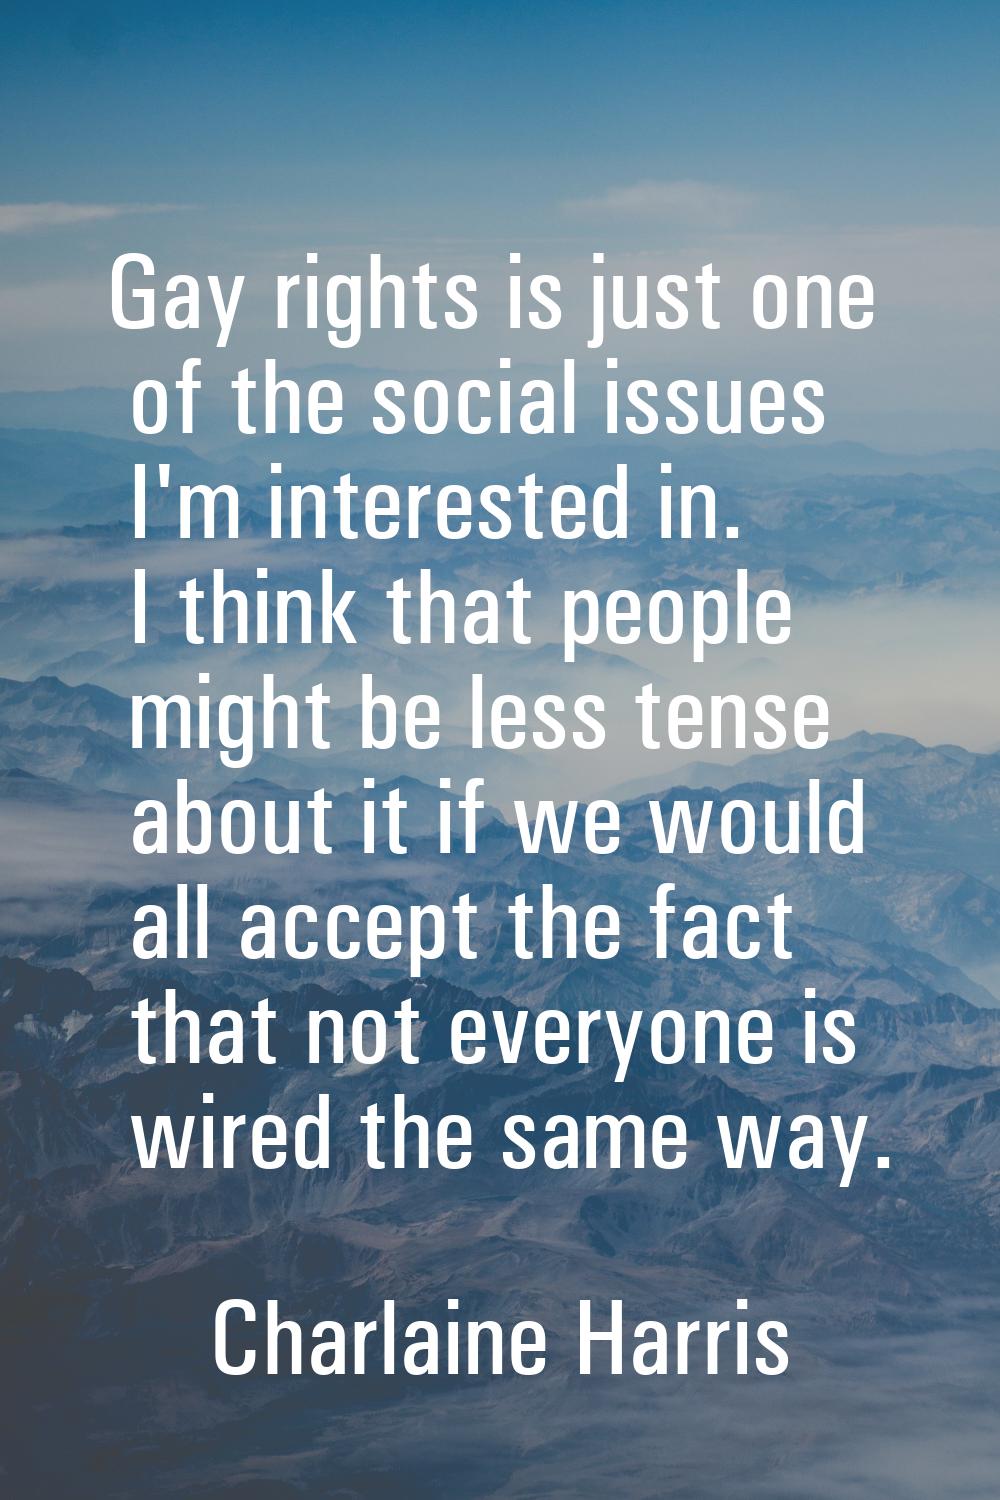 Gay rights is just one of the social issues I'm interested in. I think that people might be less te